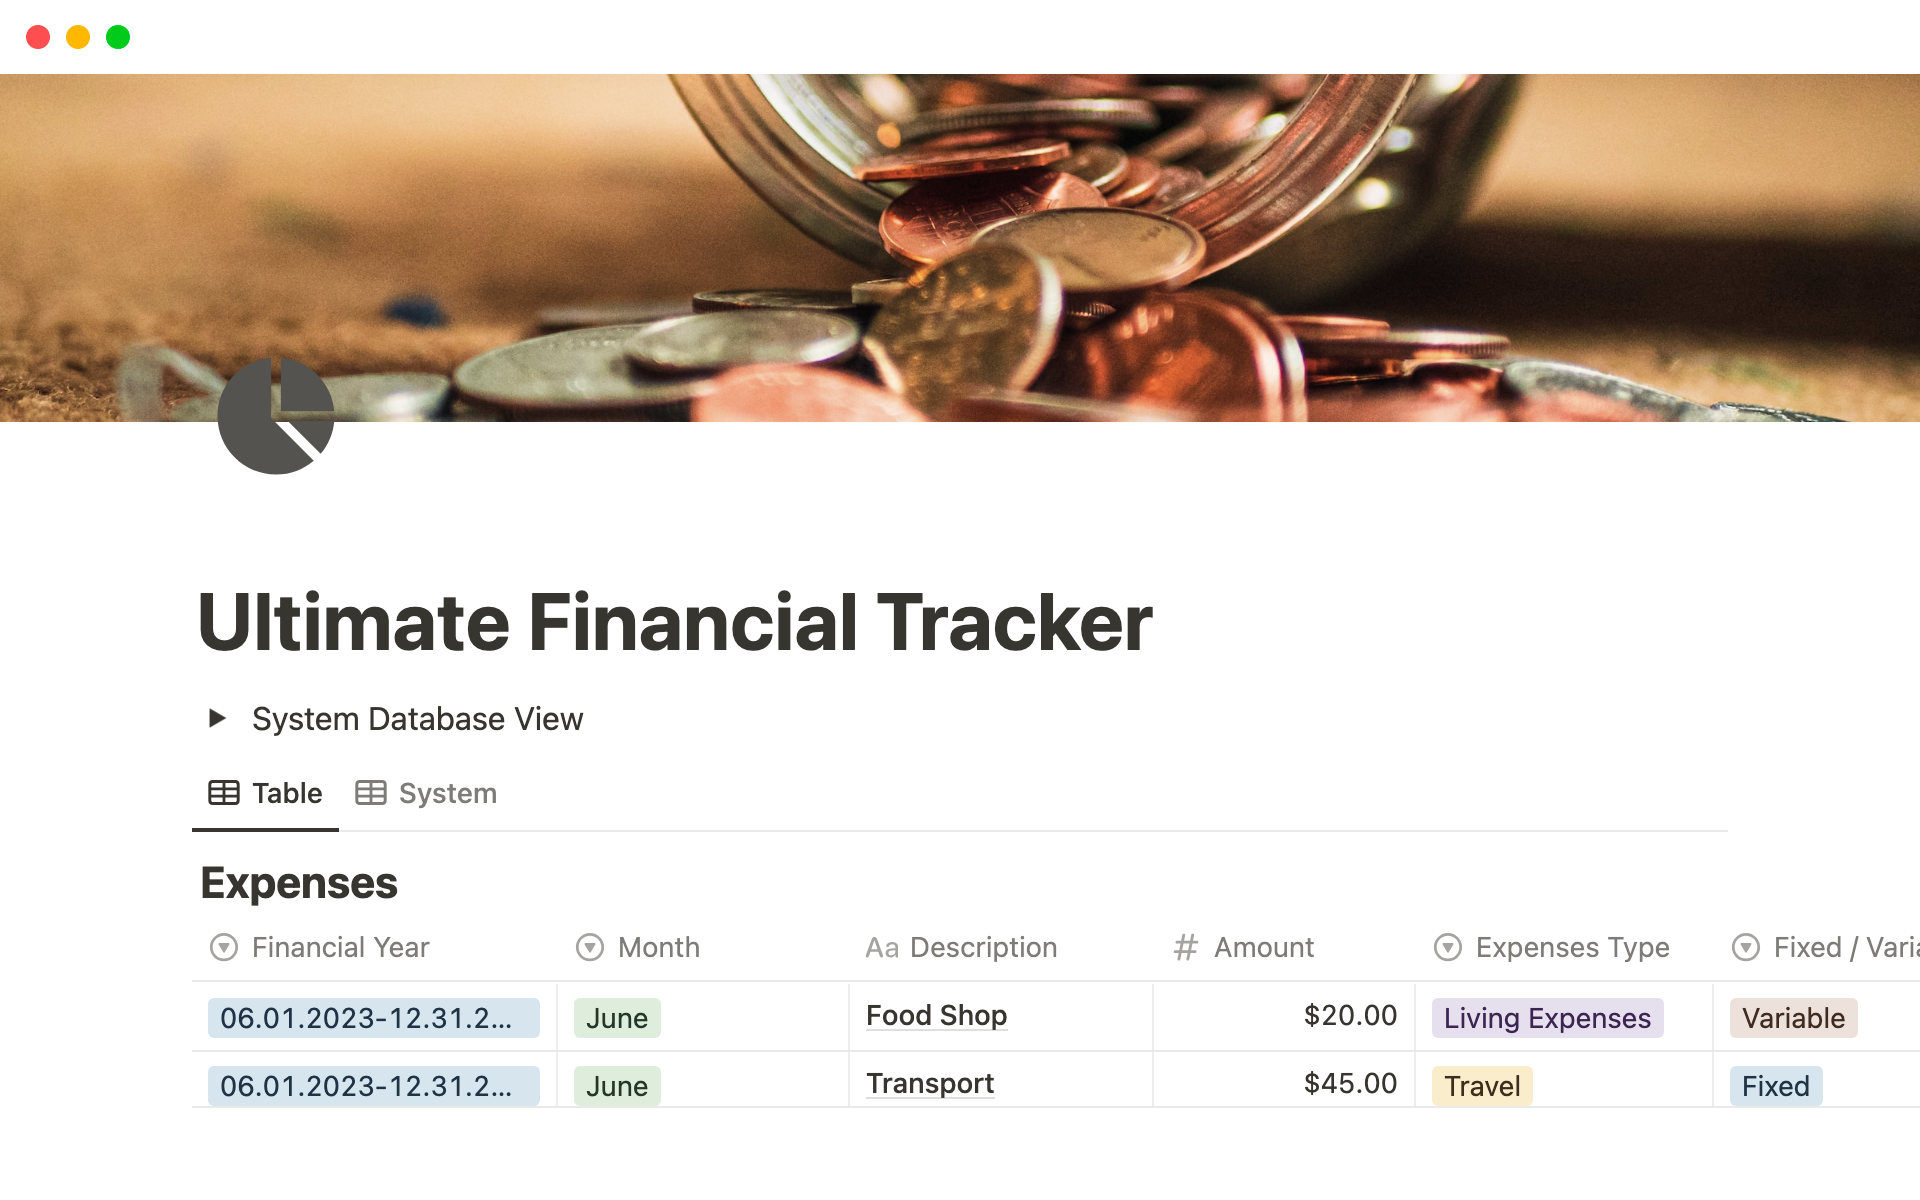 It helps users to plan and track their finances